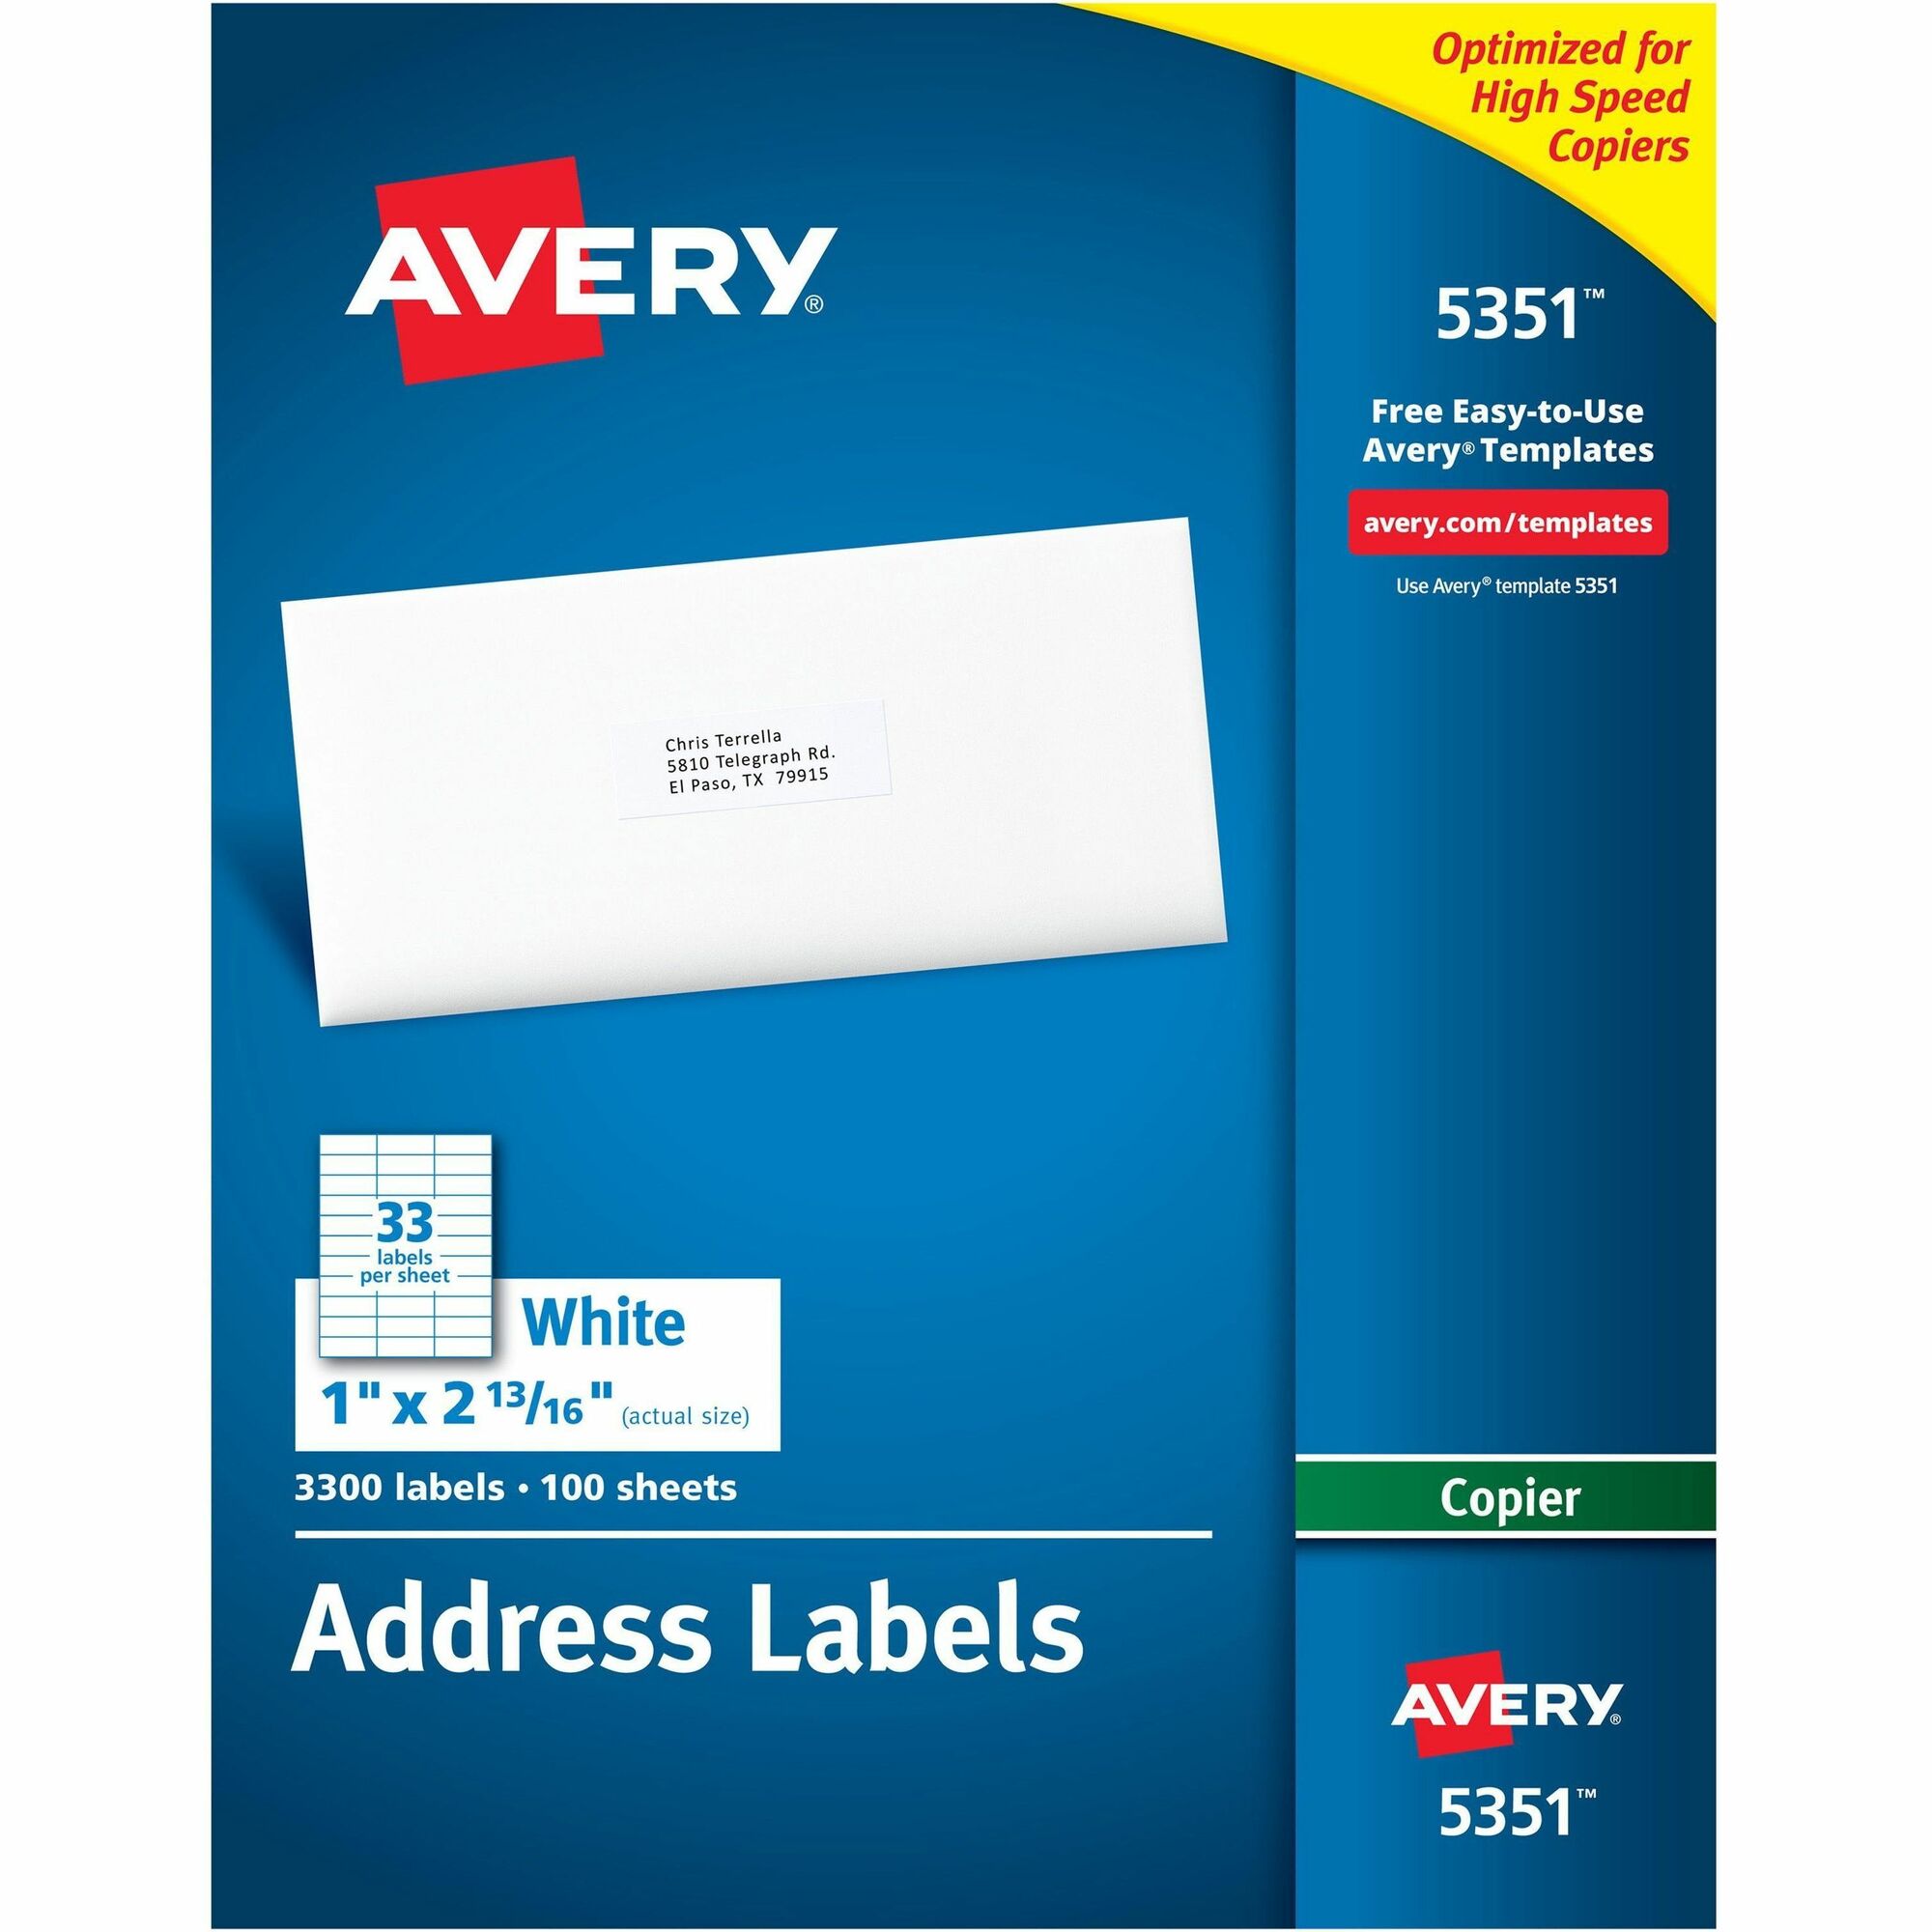 avery-address-labels-for-copiers-permanent-adhesive-1-x-2-13-16-3-300-labels-5351